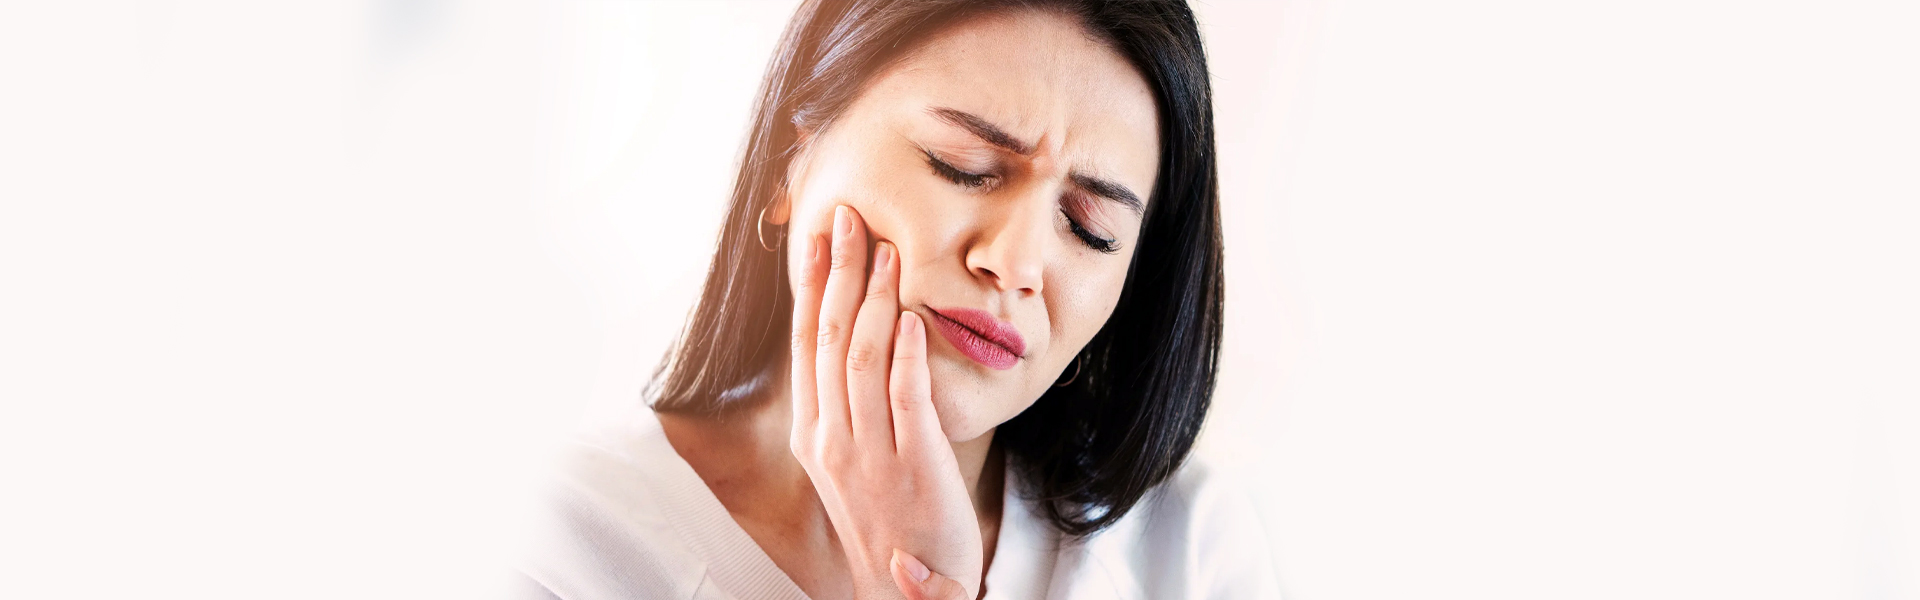 Acting Appropriately during Dental Emergencies Helps Avoid Unnecessary Complications